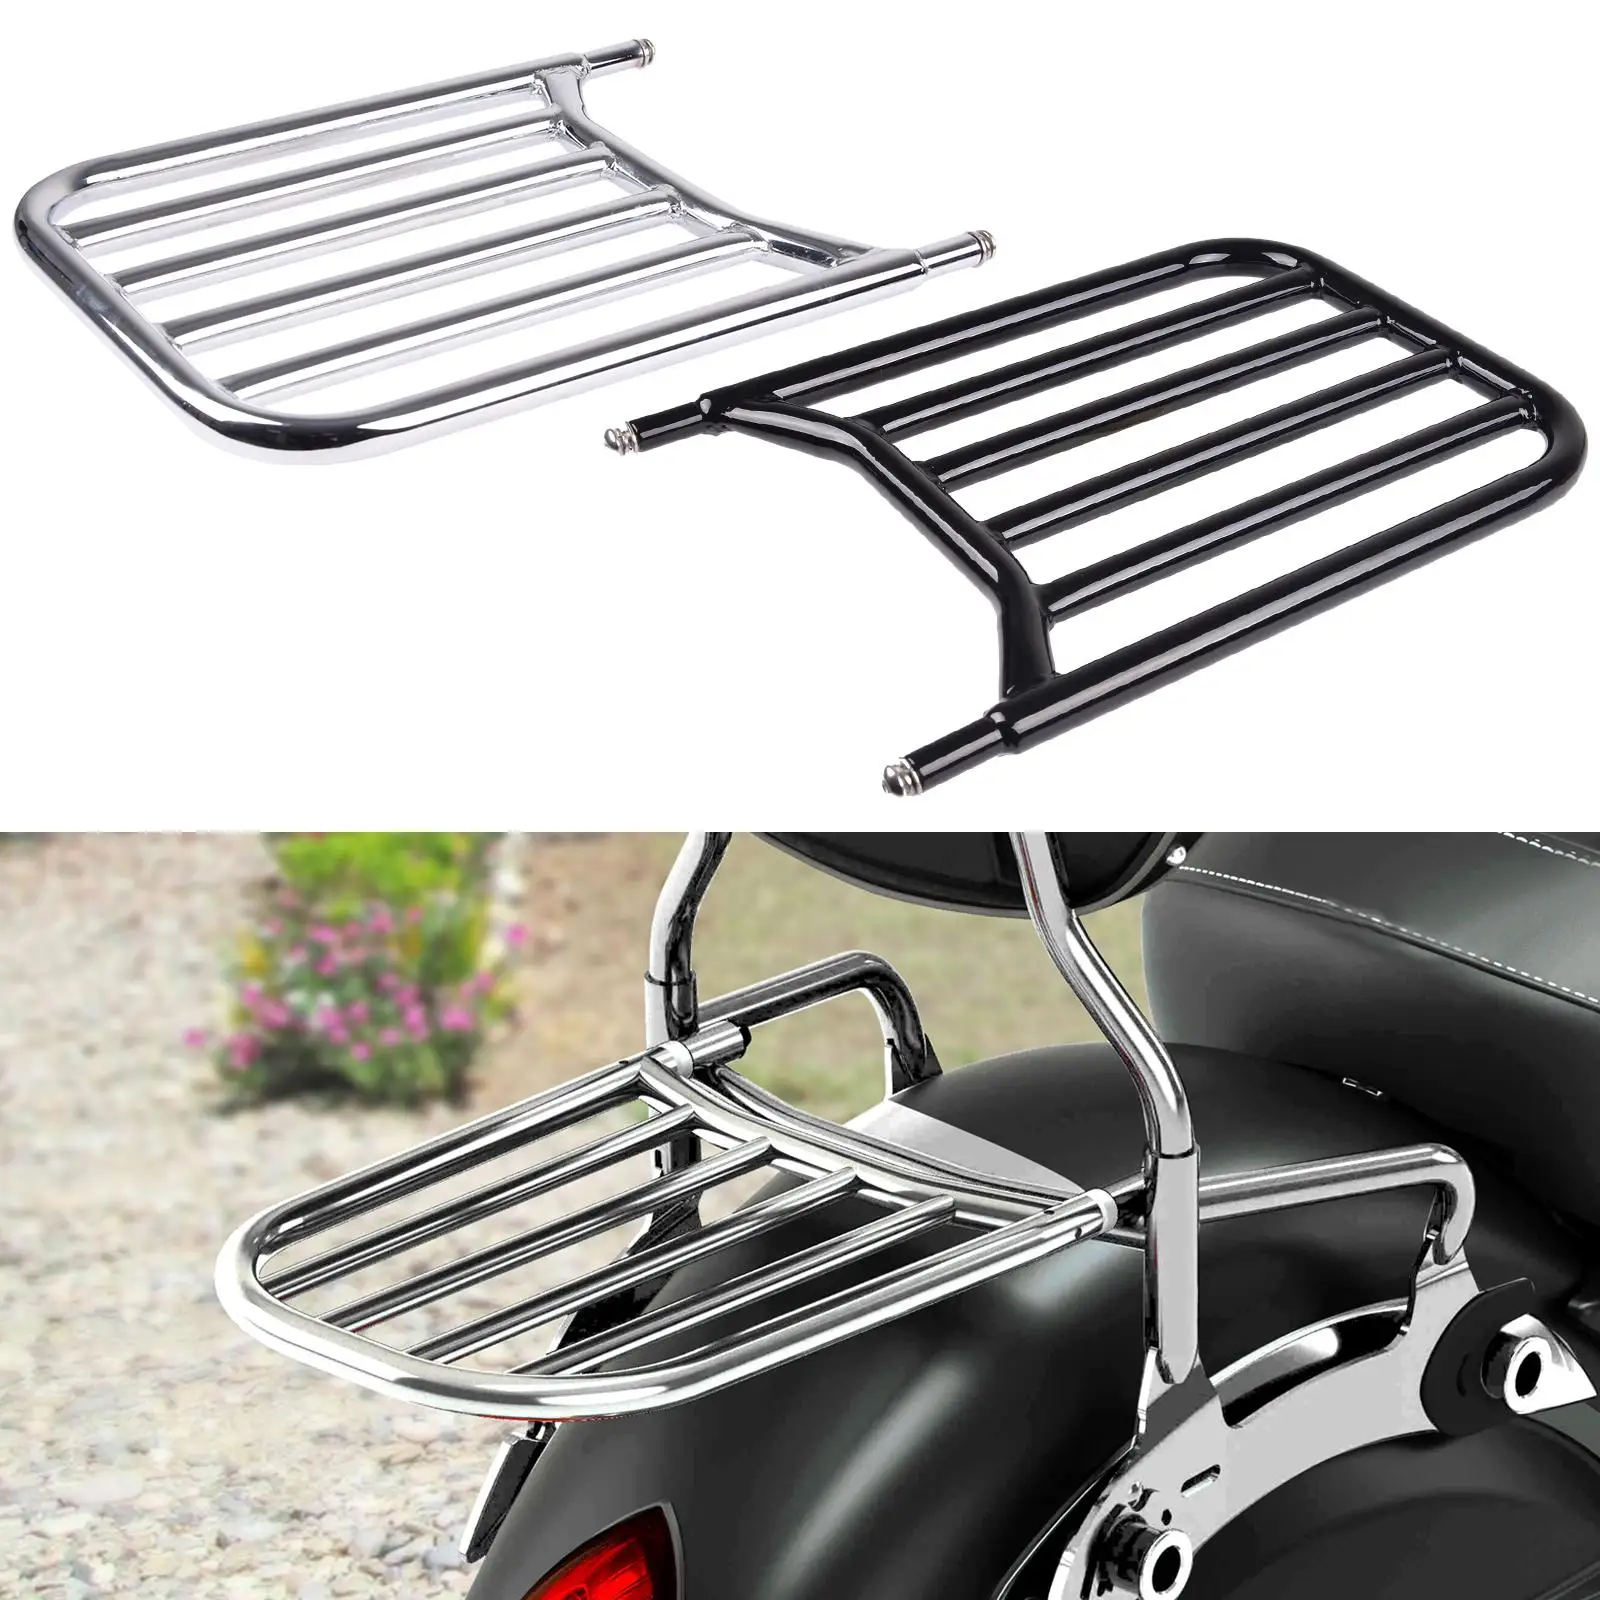 Rear Backrest Sissy Bar Accessories Cargo Carrier Luggage Rack Fit for Roadmaster Indian Chieftain Vintage Classic 2014-2021